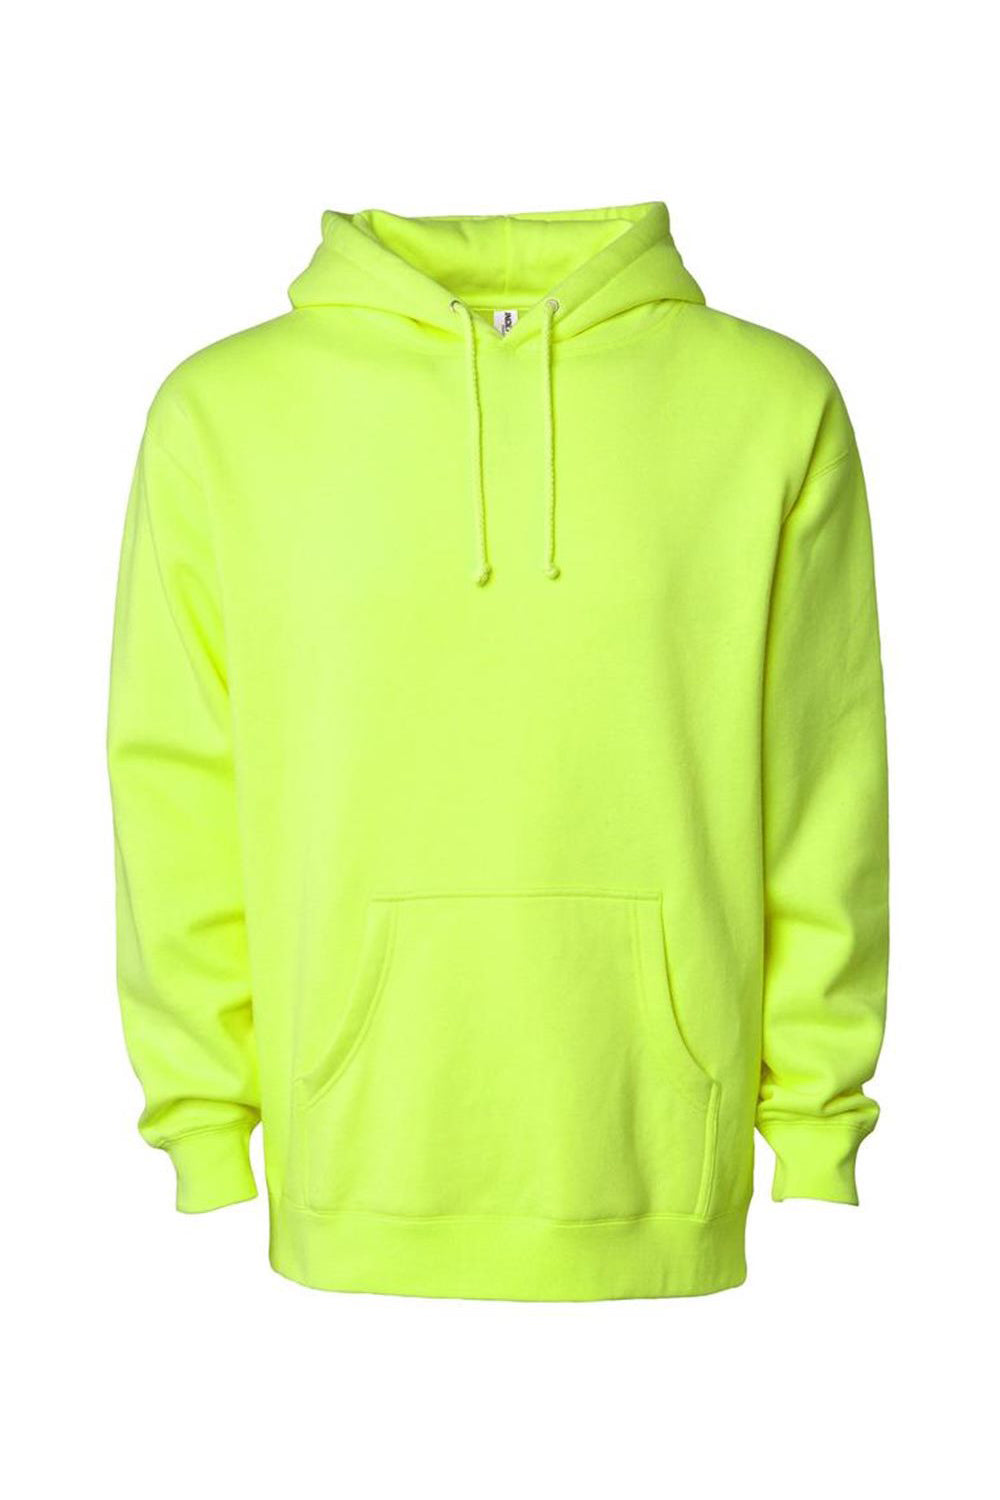 Independent Trading Co. IND4000 Mens Hooded Sweatshirt Hoodie Safety Yellow Flat Front